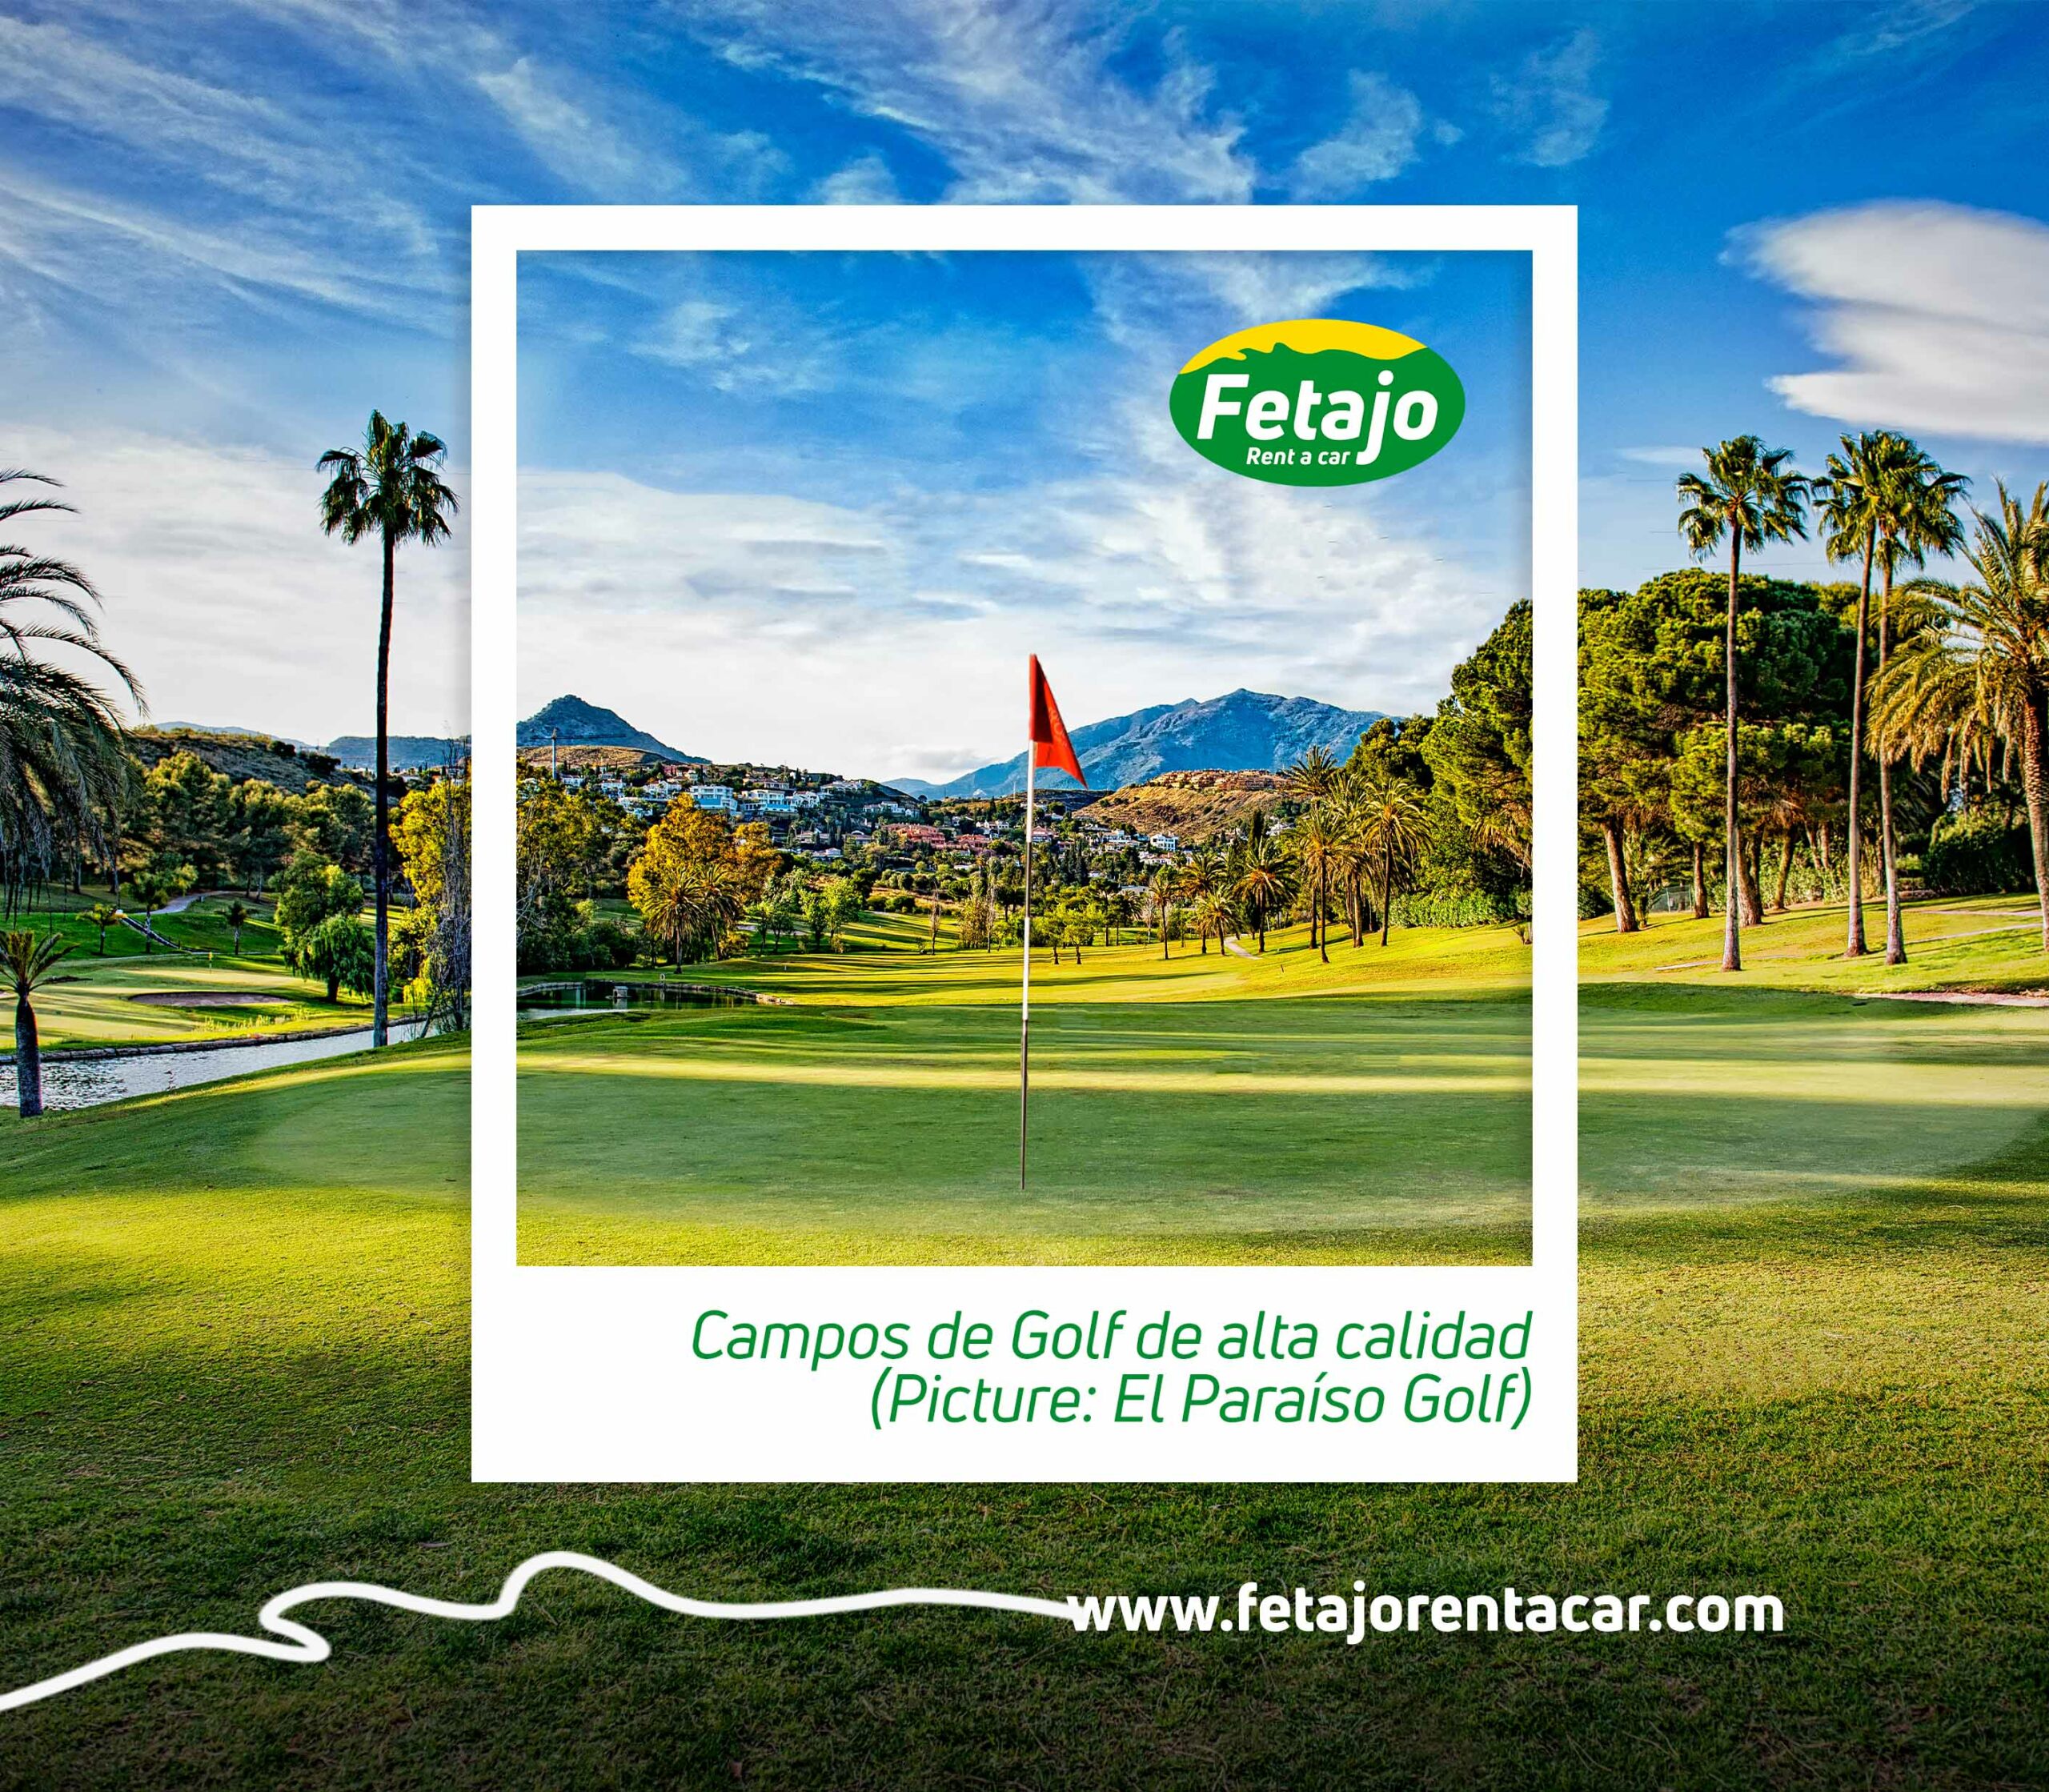 quality-golf-for-trips-to-malaga-in-winter